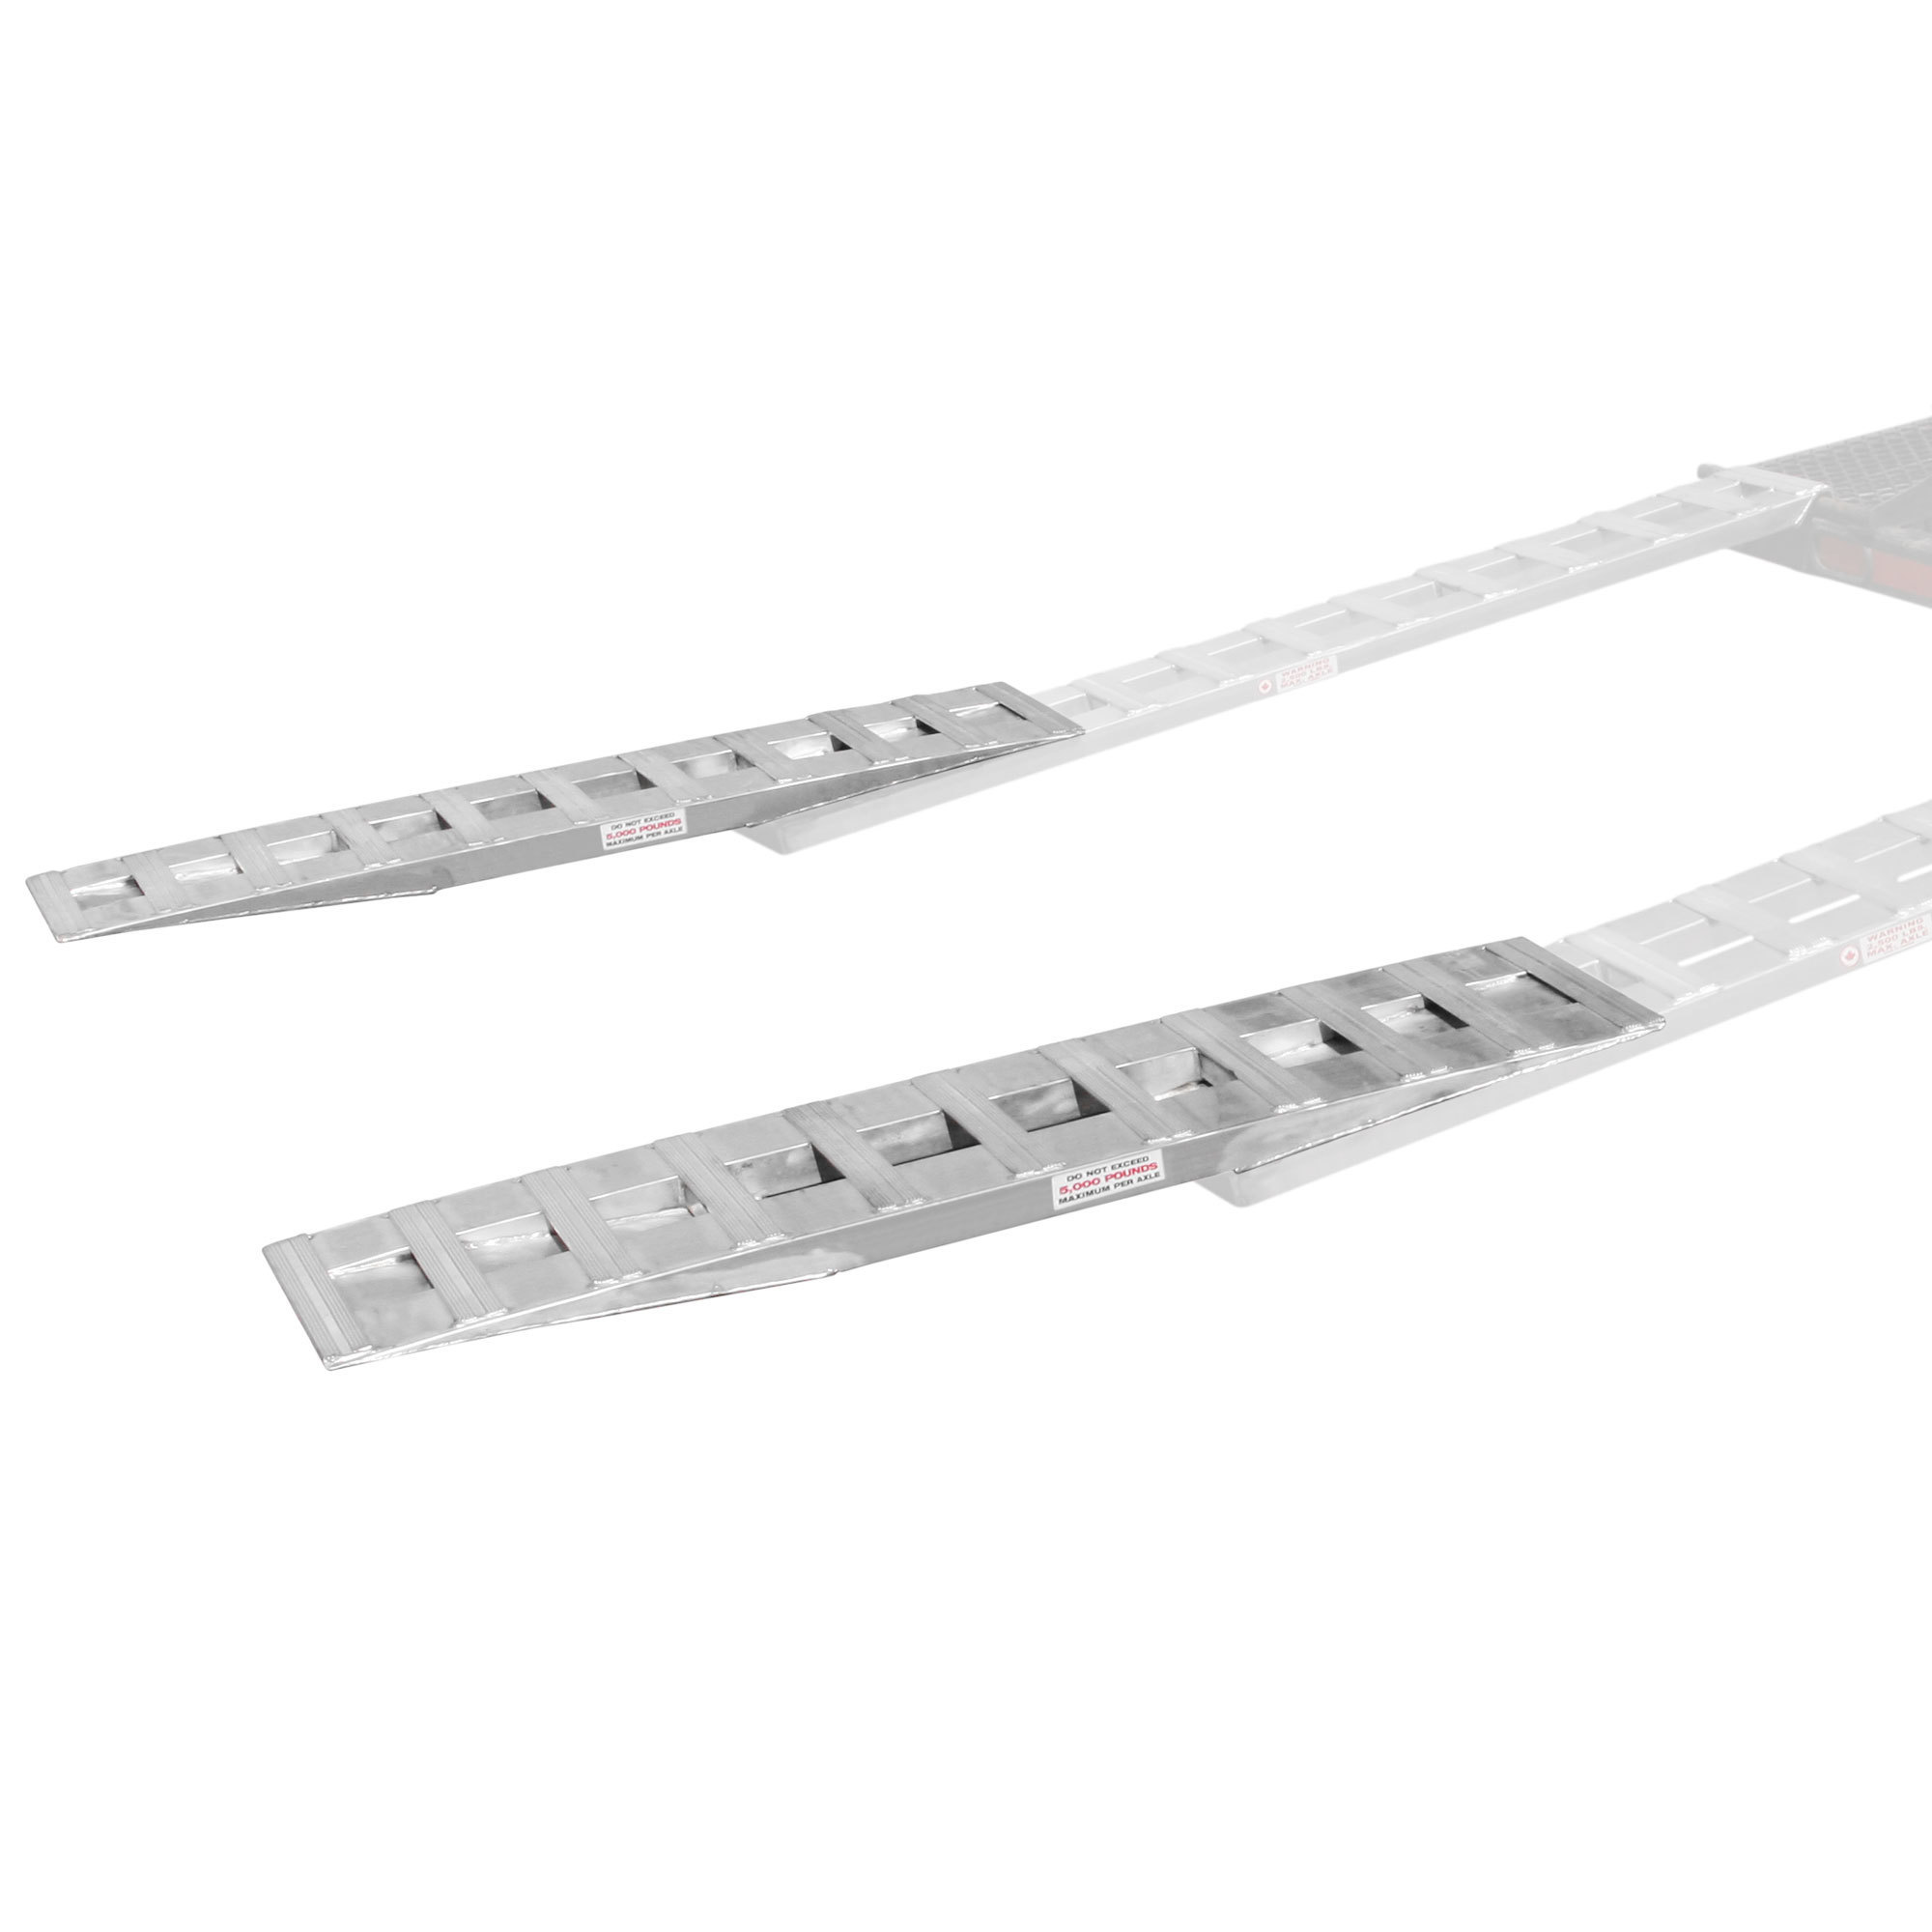 Heavy Duty Ramps 5ft. x 15Inch Lay-over Trailer Ramp Extensions, Aluminum, 5000lb. Capacity, Model 05-15-060-00-00